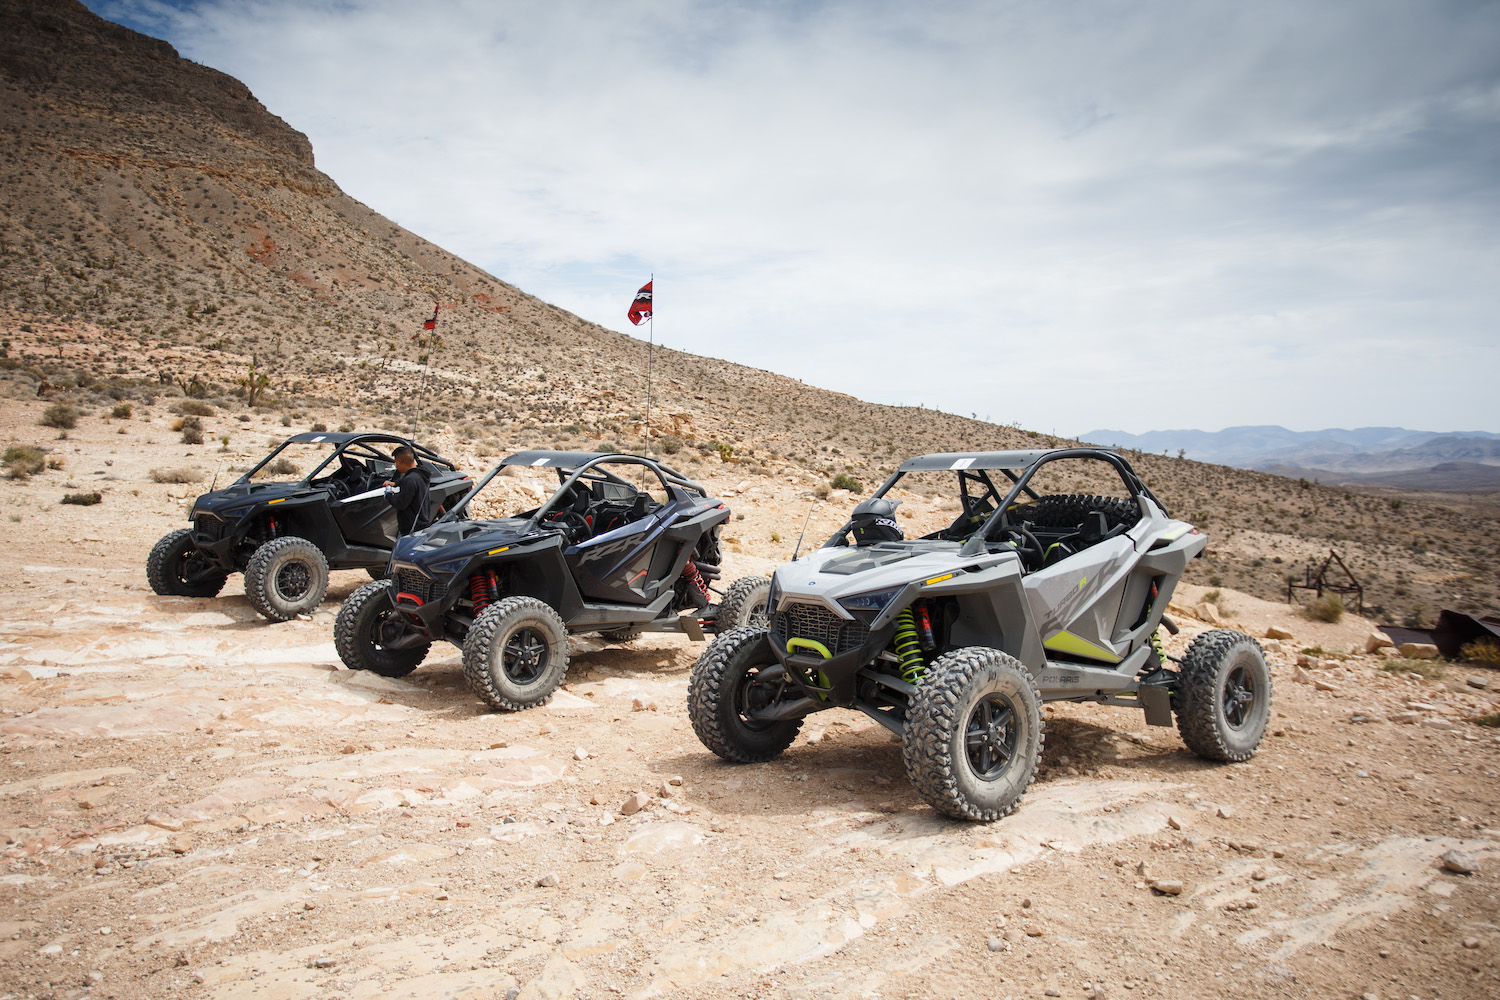 Polaris RZR Pro R and Turbo R from driver's side angle on a dirt path with mountains in the background in the Mojave desert.